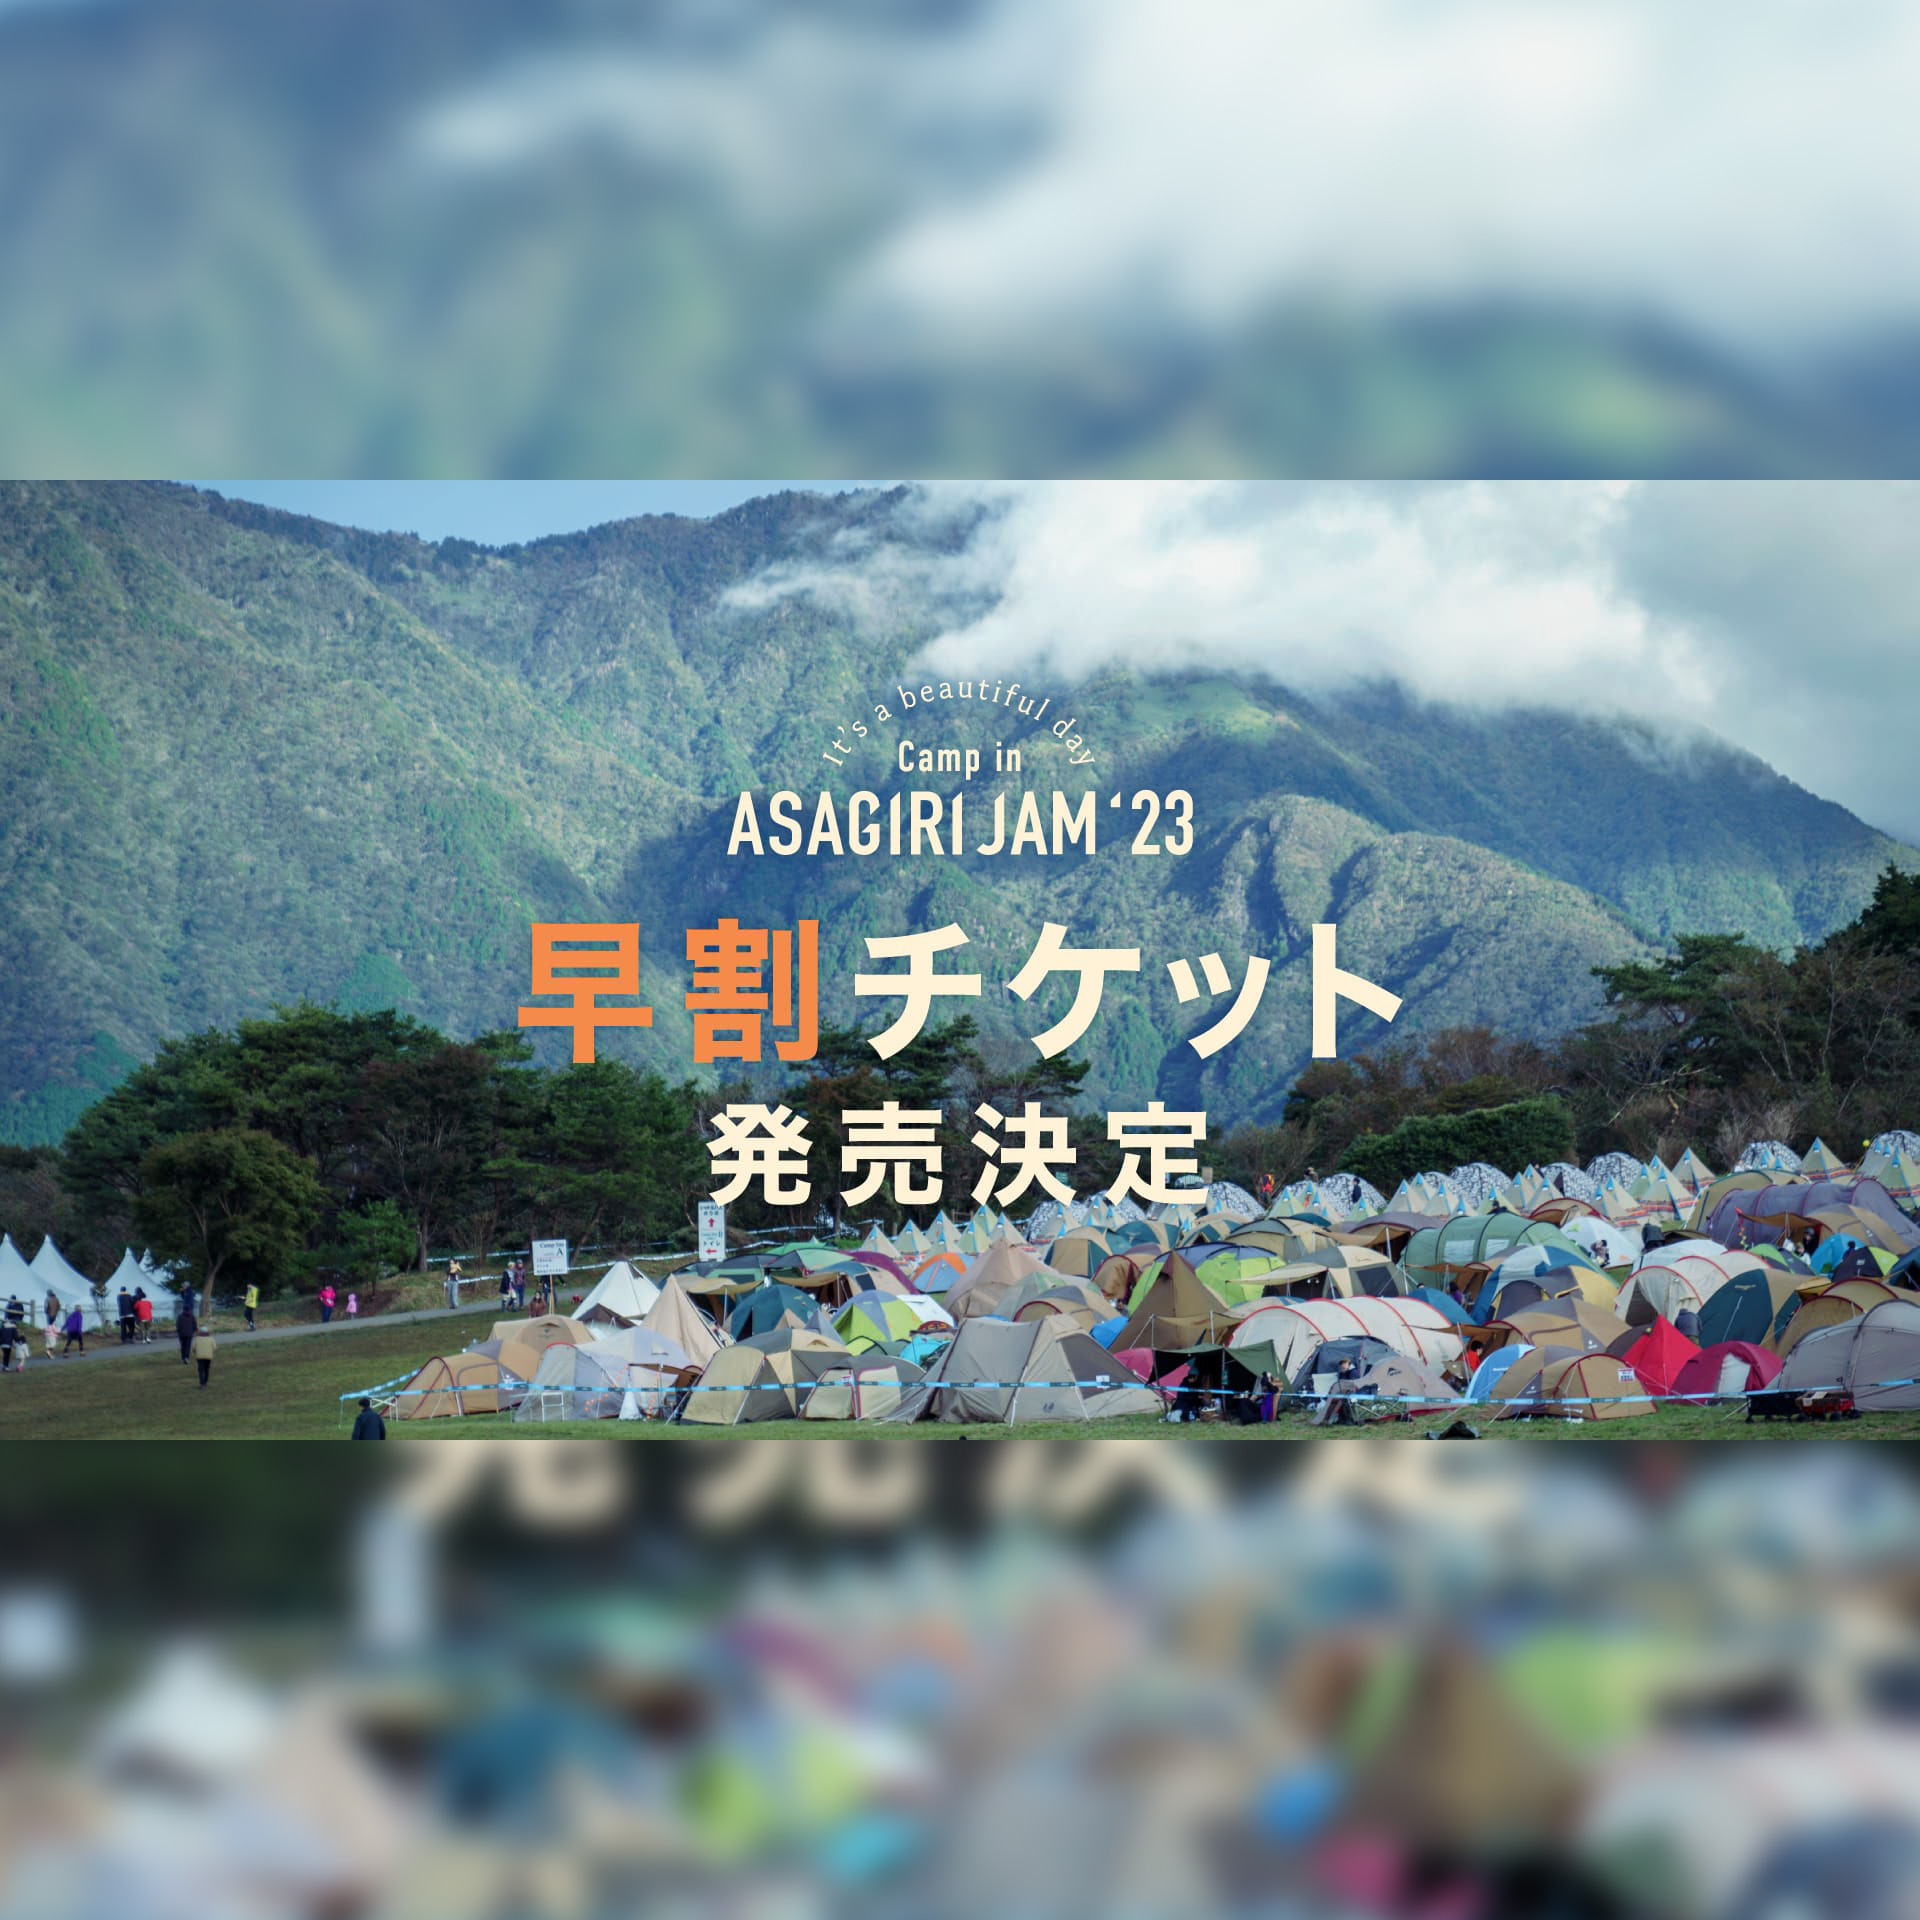 It's a beautiful day” Camp in 朝霧JAMチケット受付 - イープラス